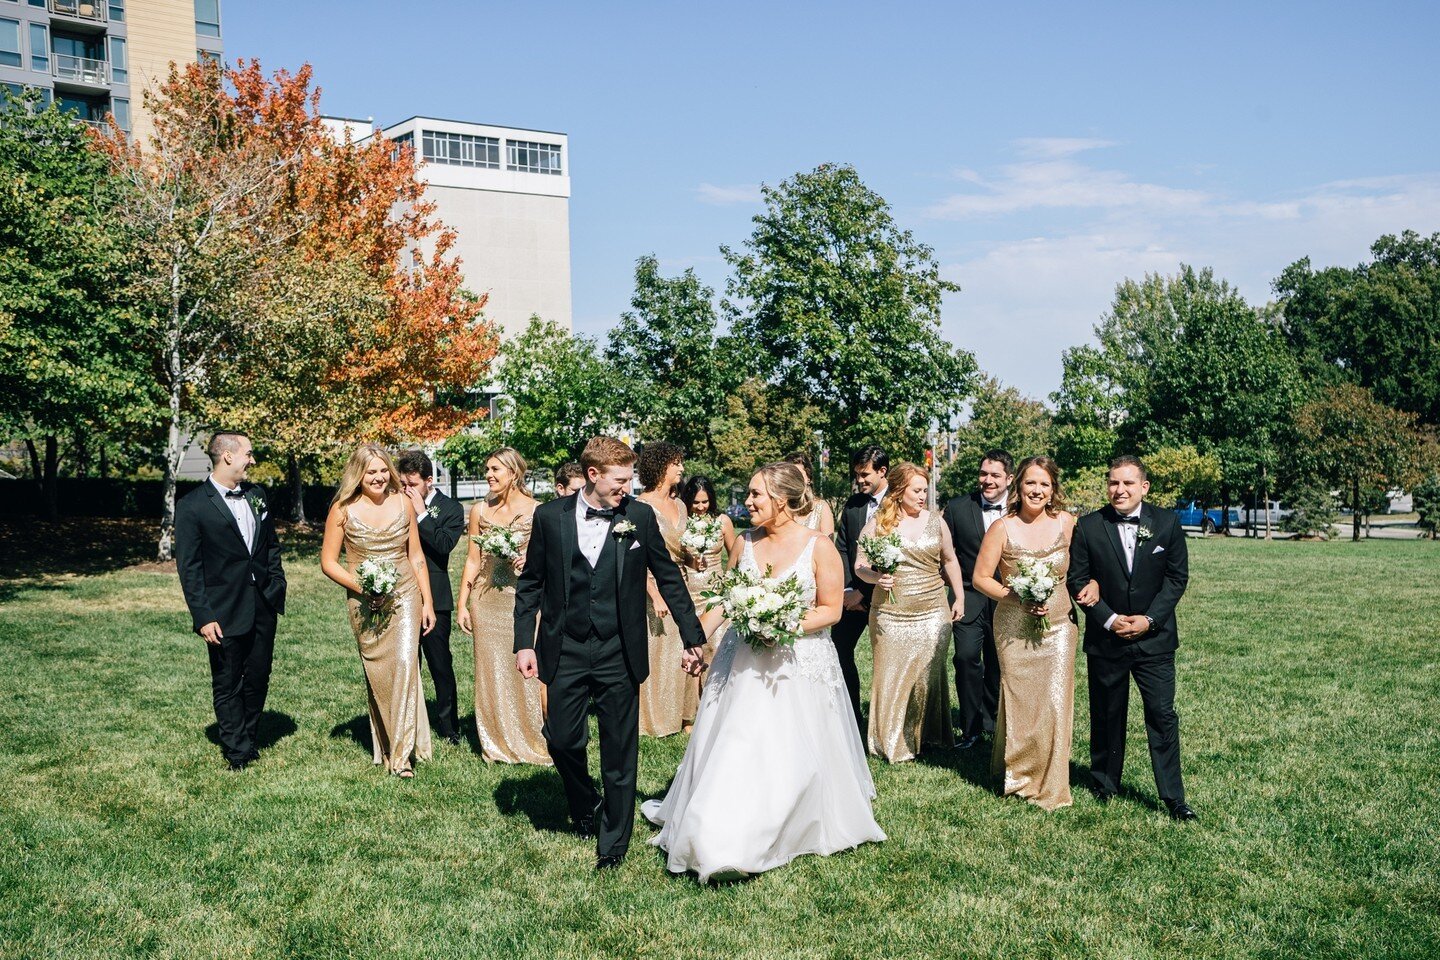 ✨The Bride and Groom decided to get some sun at Turner Park, just across the street from the Empire Room✨⁠
⁠
Discover the possibilities of your event at our venue when you schedule a tour with one of our Expert Event Managers today.✨⁠
⁠
Photography |